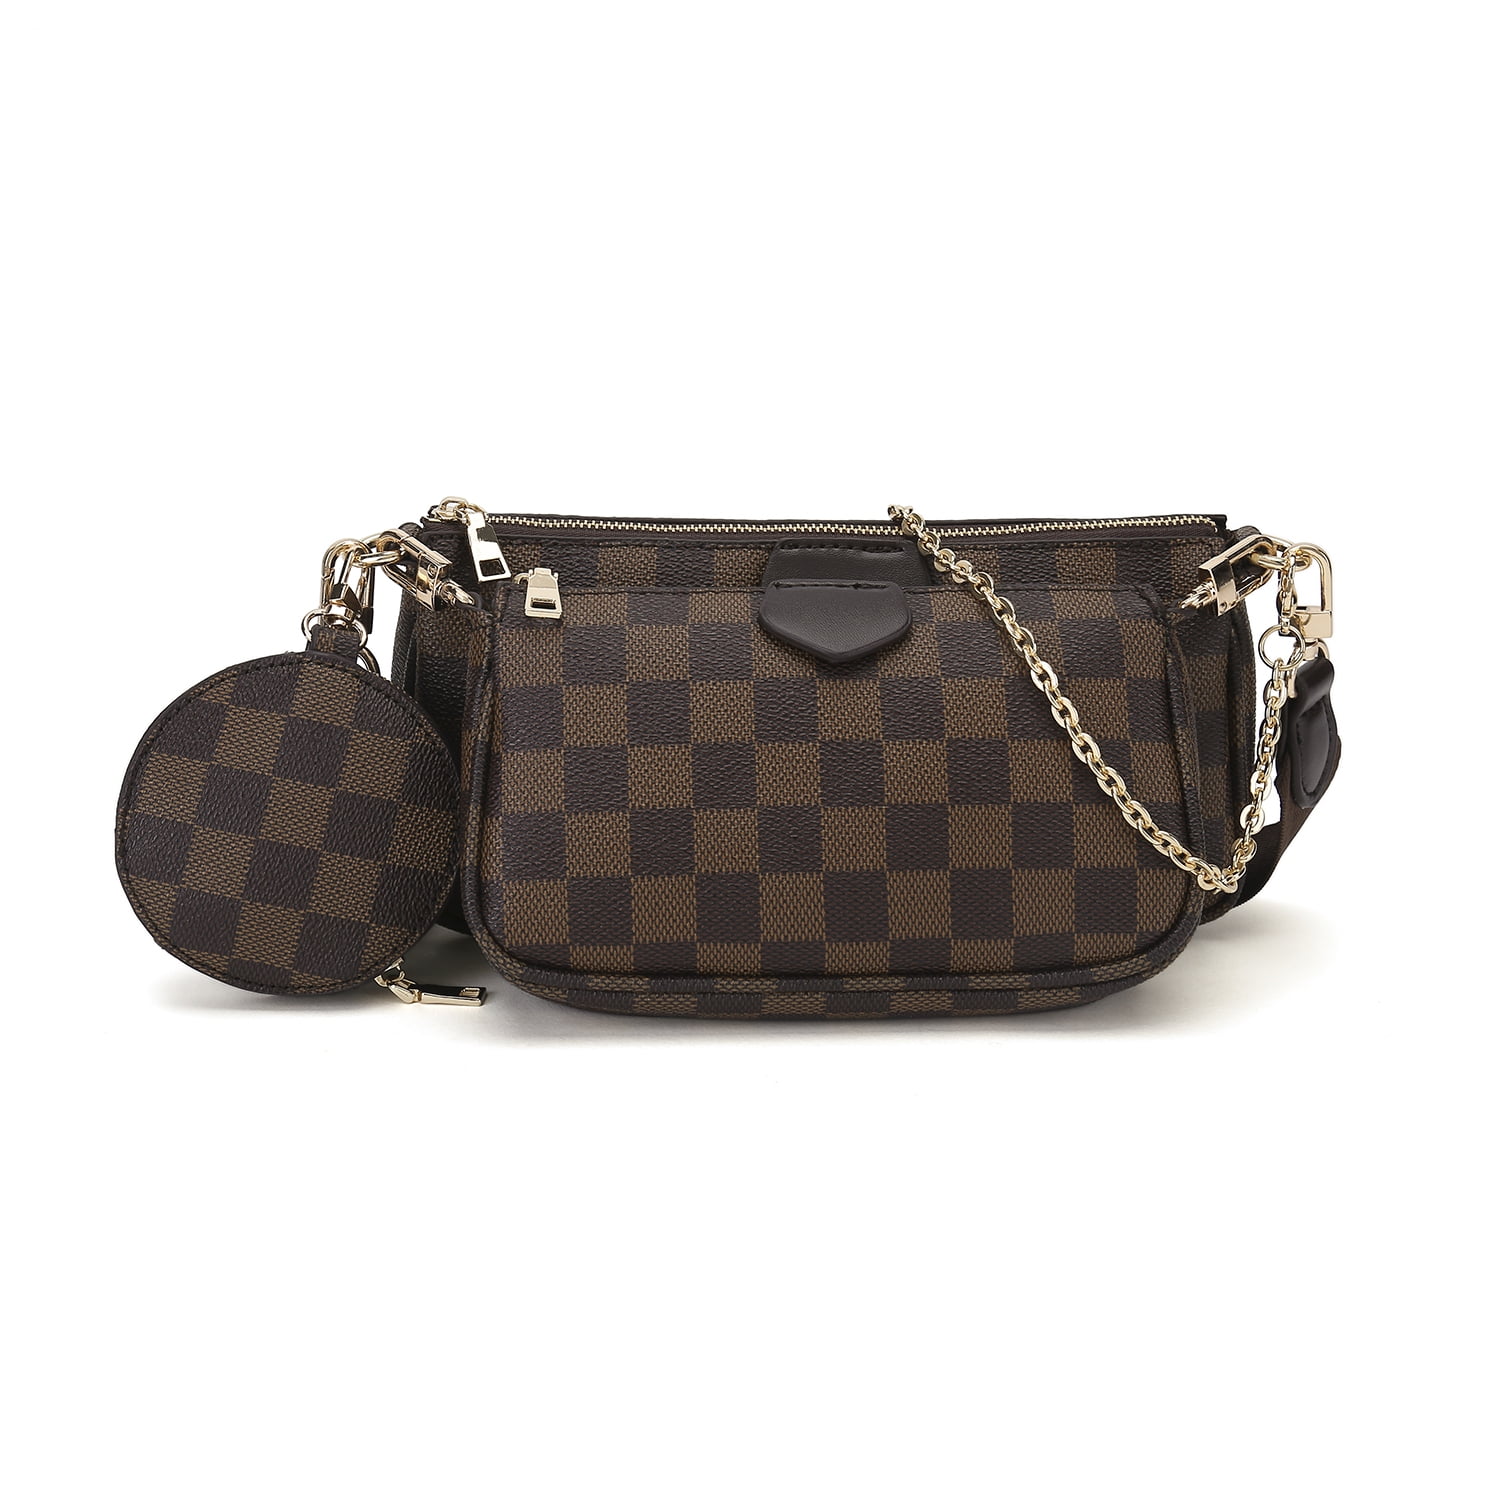 Mk Gdledy Checkered Cross Body Bag - Womens Purse Checkered Evening Bag Ladies Shoulder Bags - PU Vegan Leather (Brown Checkered), Women's, Size: iPad